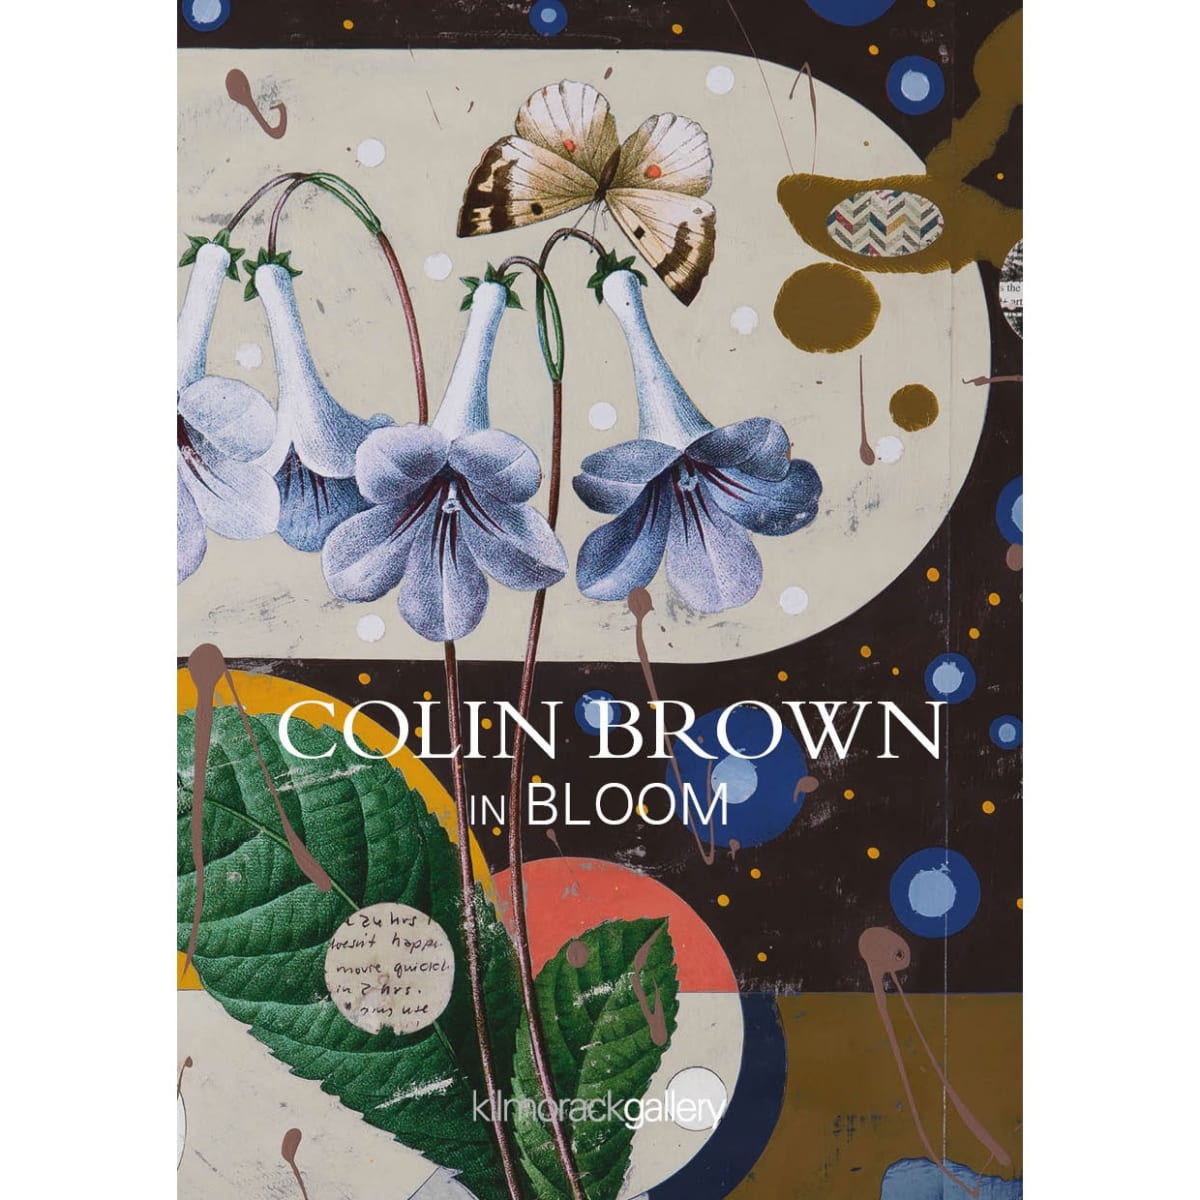 In Bloom | COLIN BROWN